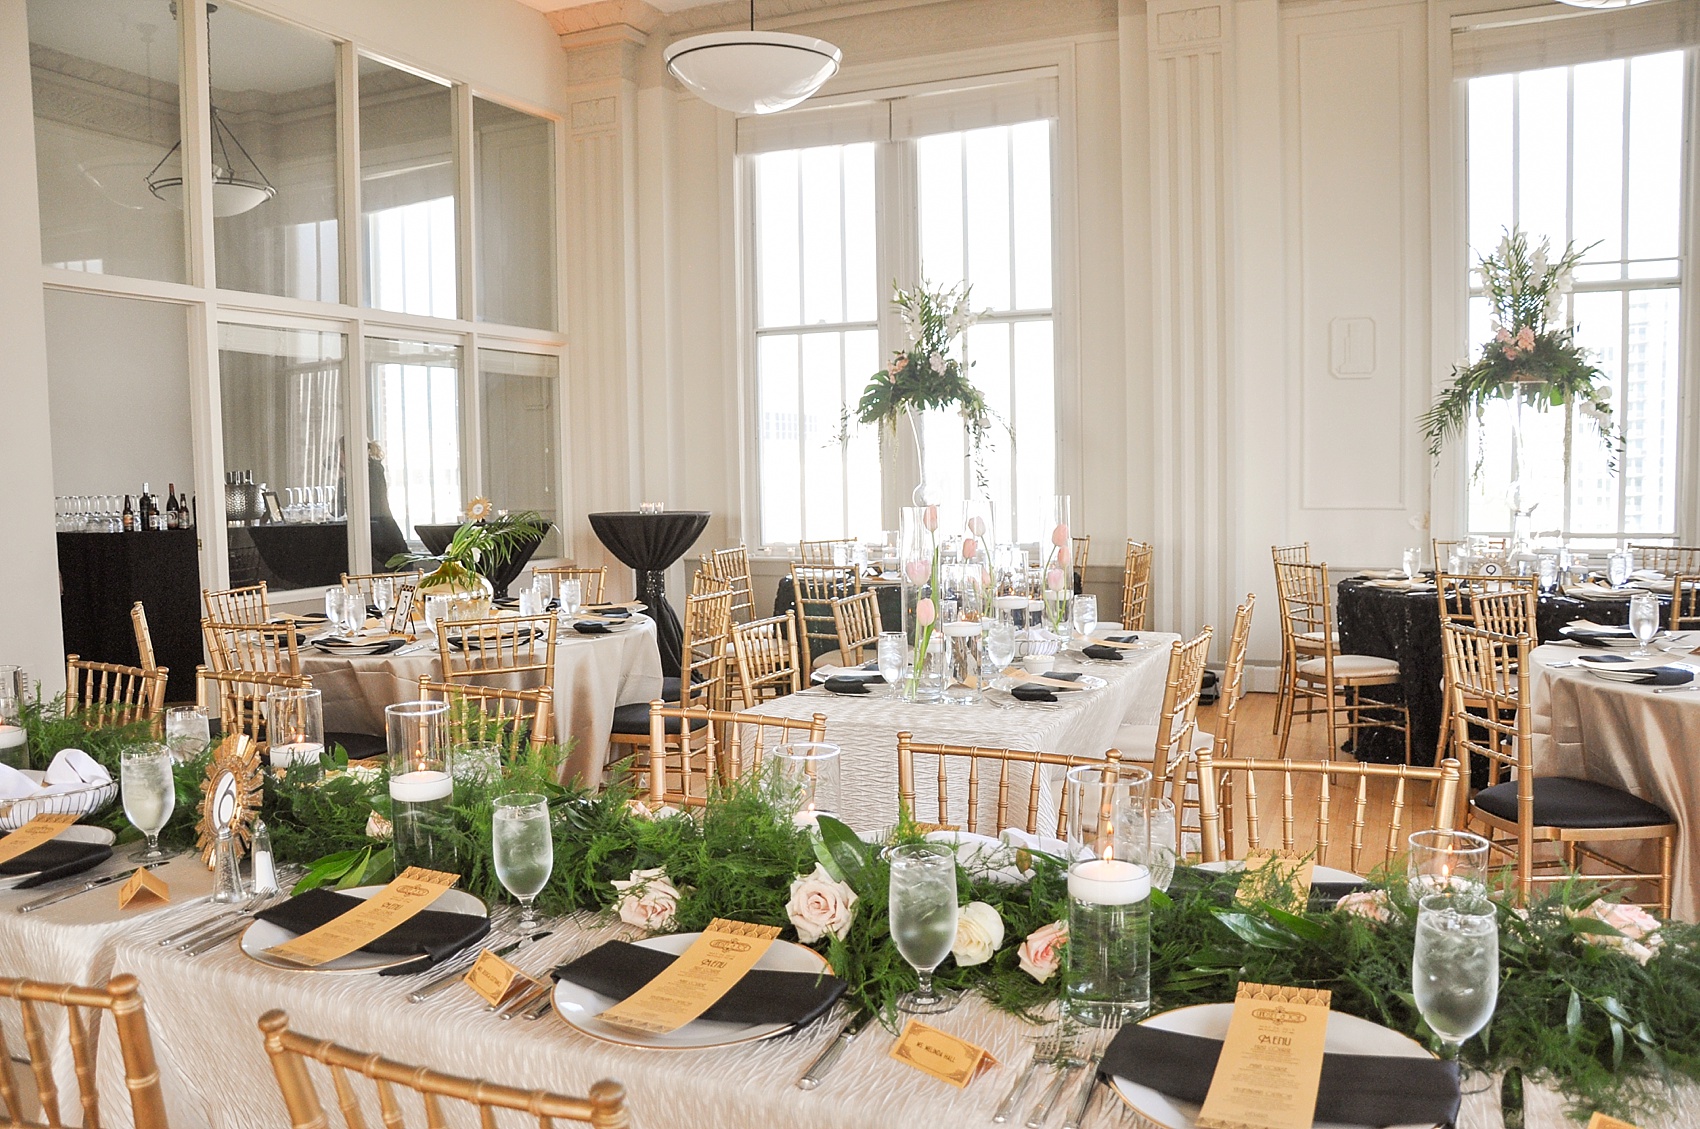 Downtown Raleigh Grand Ballroom wedding photos of Gatsby themed design with tropical leaves, white tulips, gold vase and black accents. Photos by Mikkel Paige Photography, flowers by Eclectic Sage.